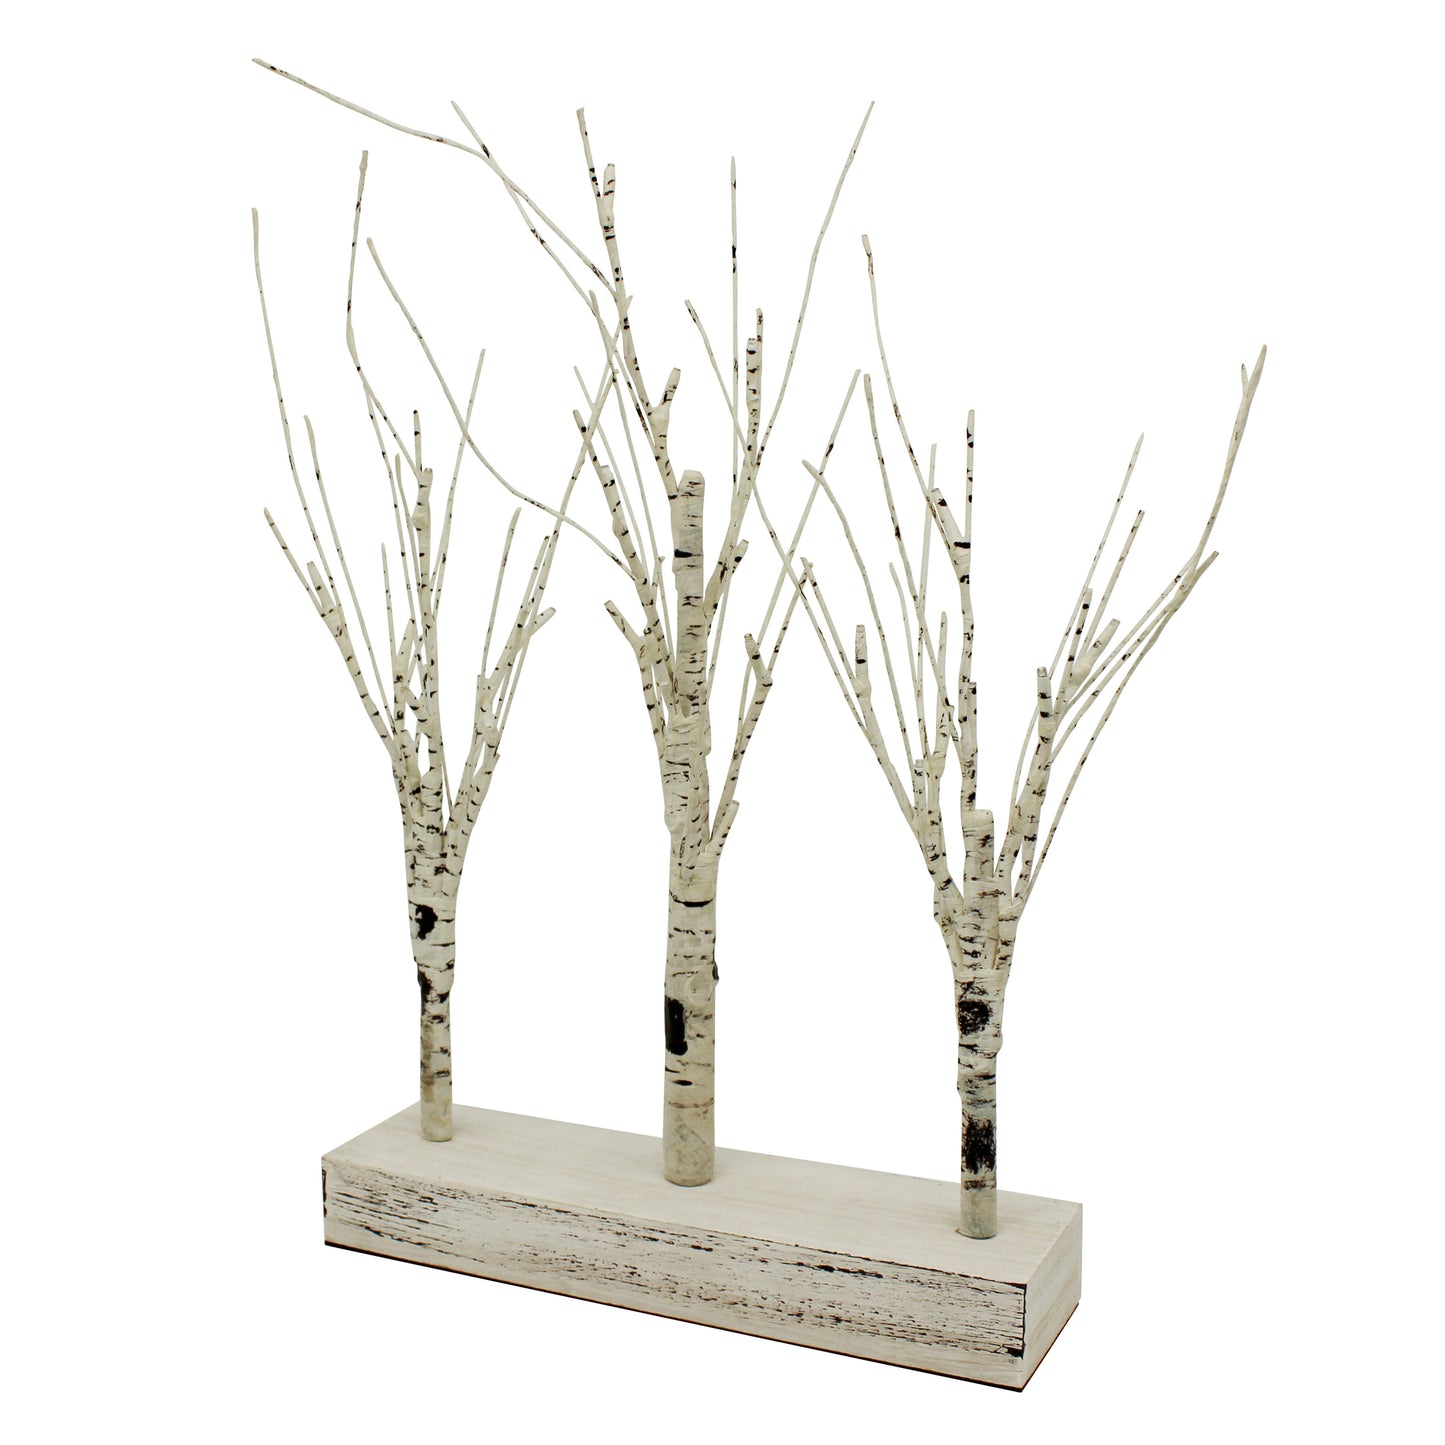 CVHOMEDECO. Battery Operated w/Timer Illuminated Birch Tree Centerpiece Lighted Three Trees Tabletop LED Lights, For Home/Party/Wedding/Festival/Indoor Decoration, 21 Inch